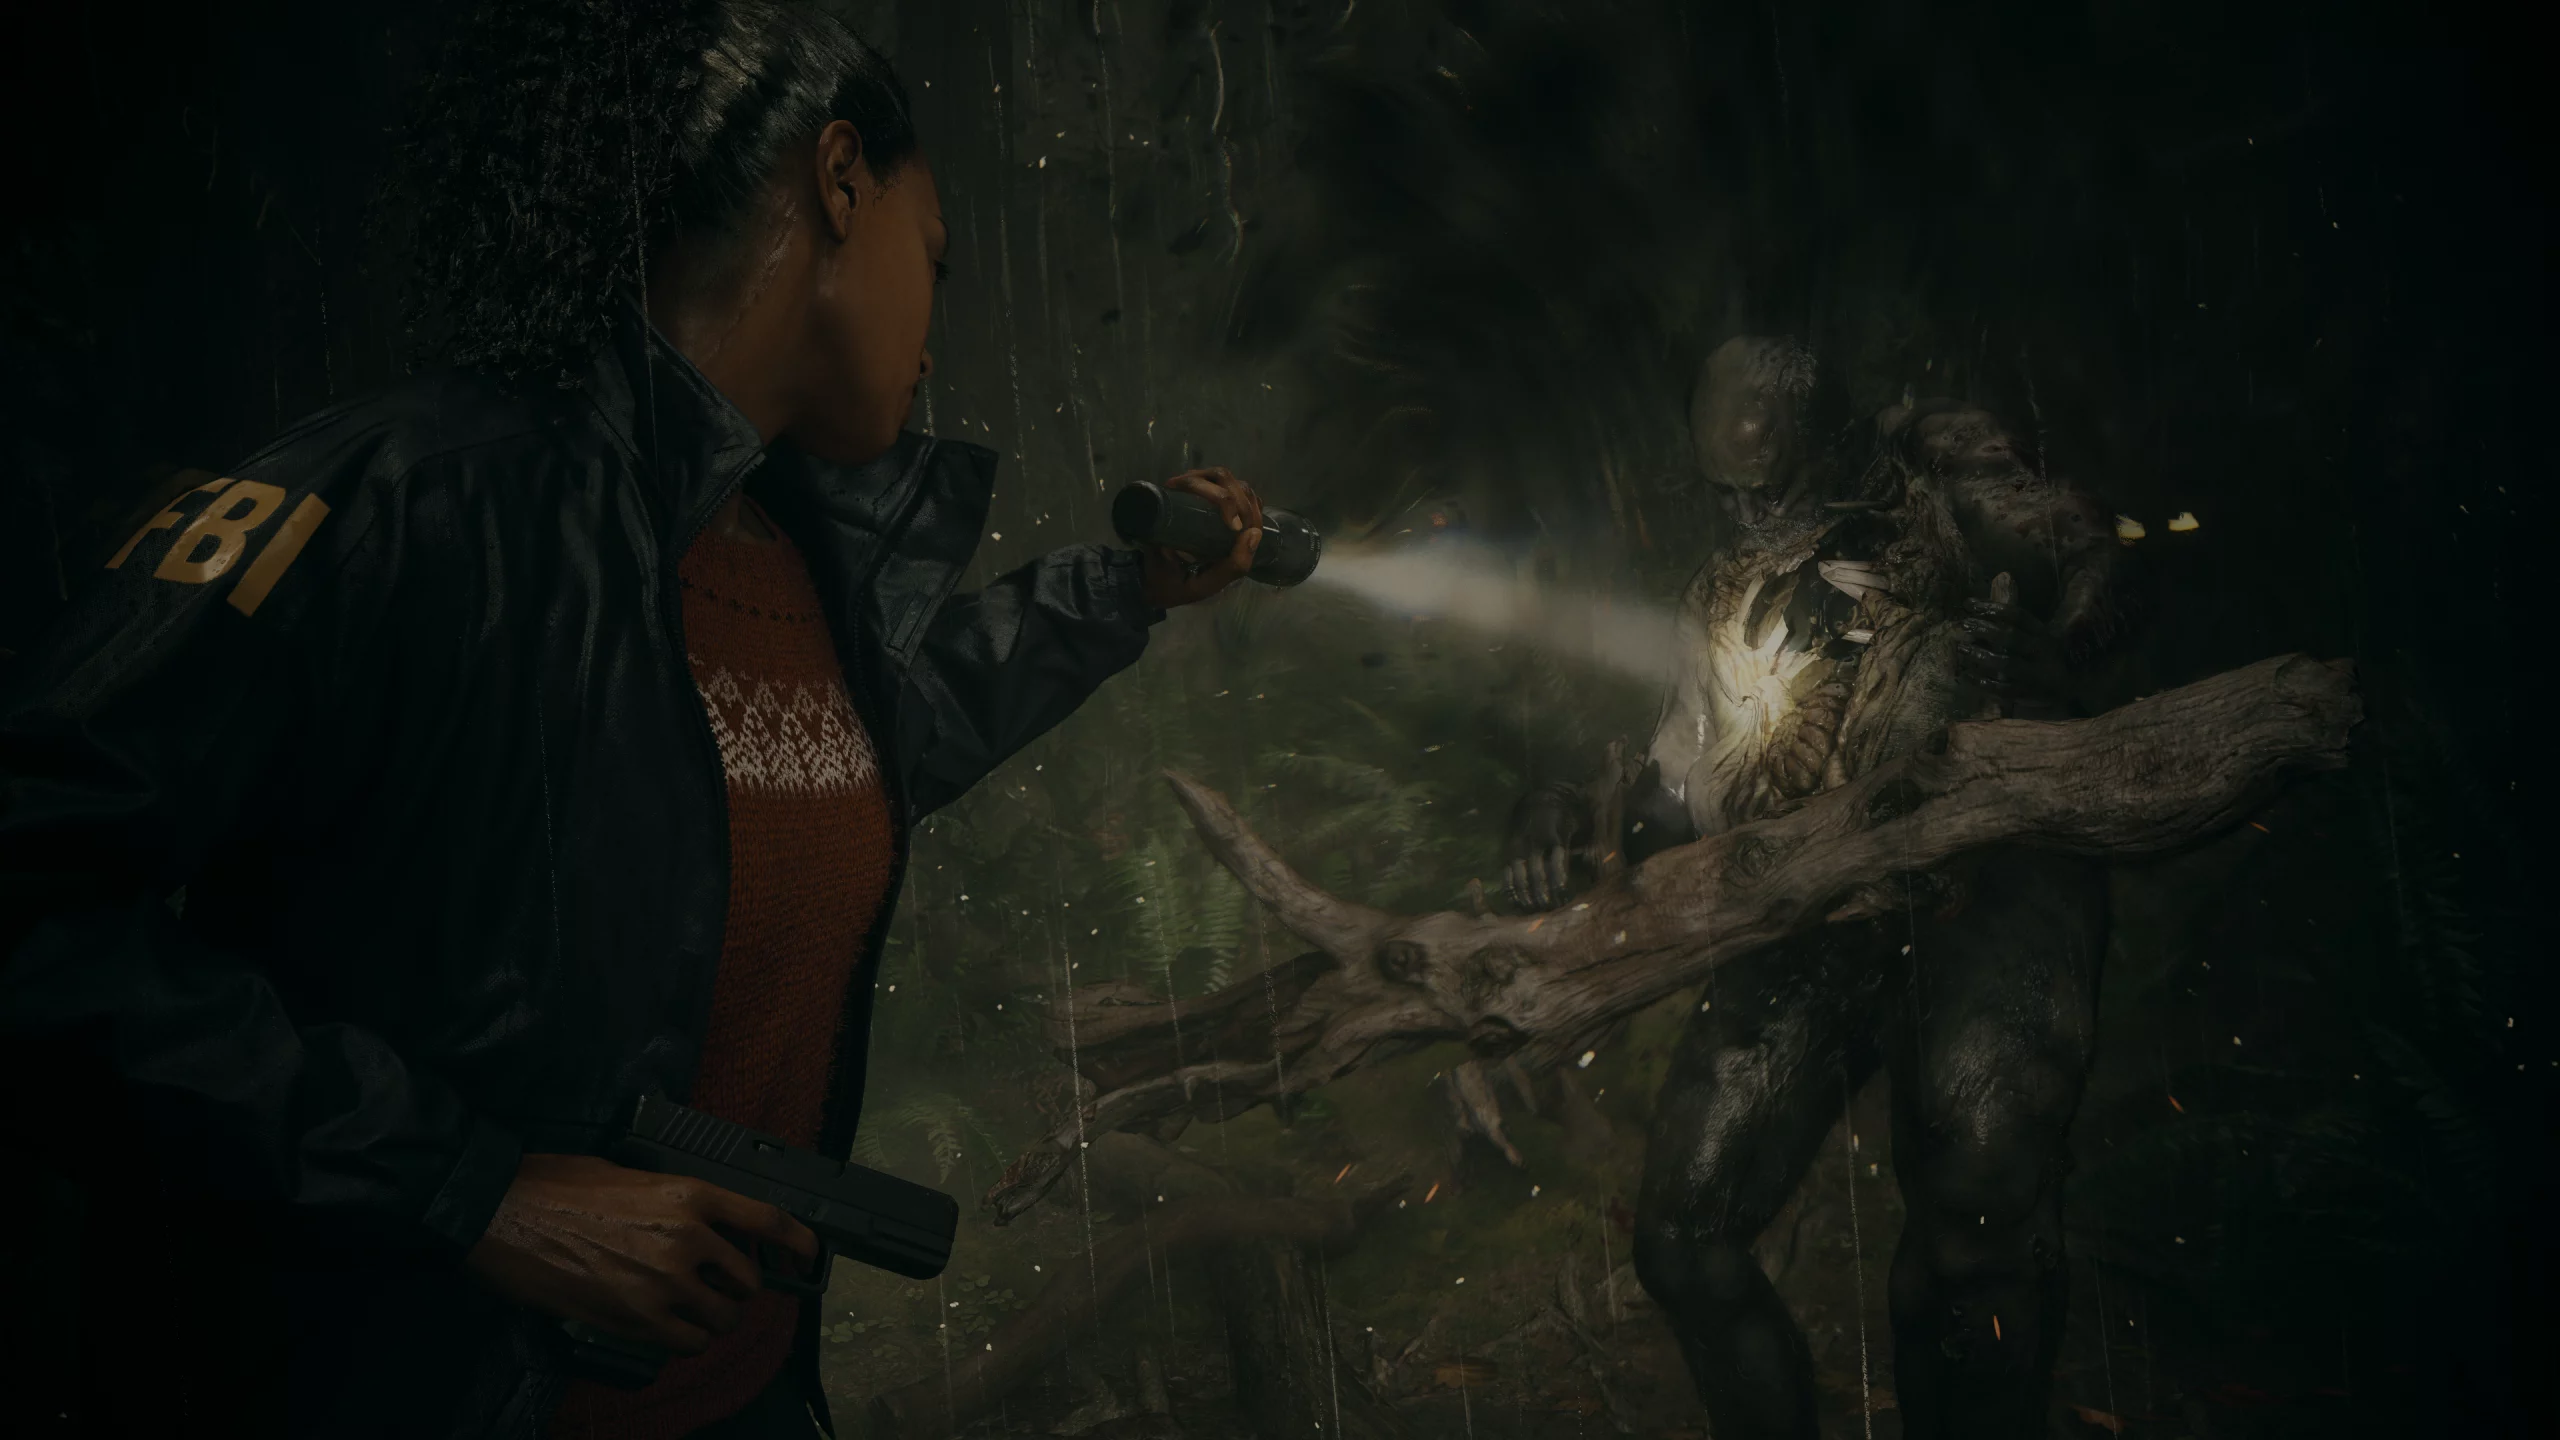 HD wallpaper of a suspenseful scene from Alan Wake 2, featuring a character shining a flashlight on a mysterious figure in a dark, forested setting.